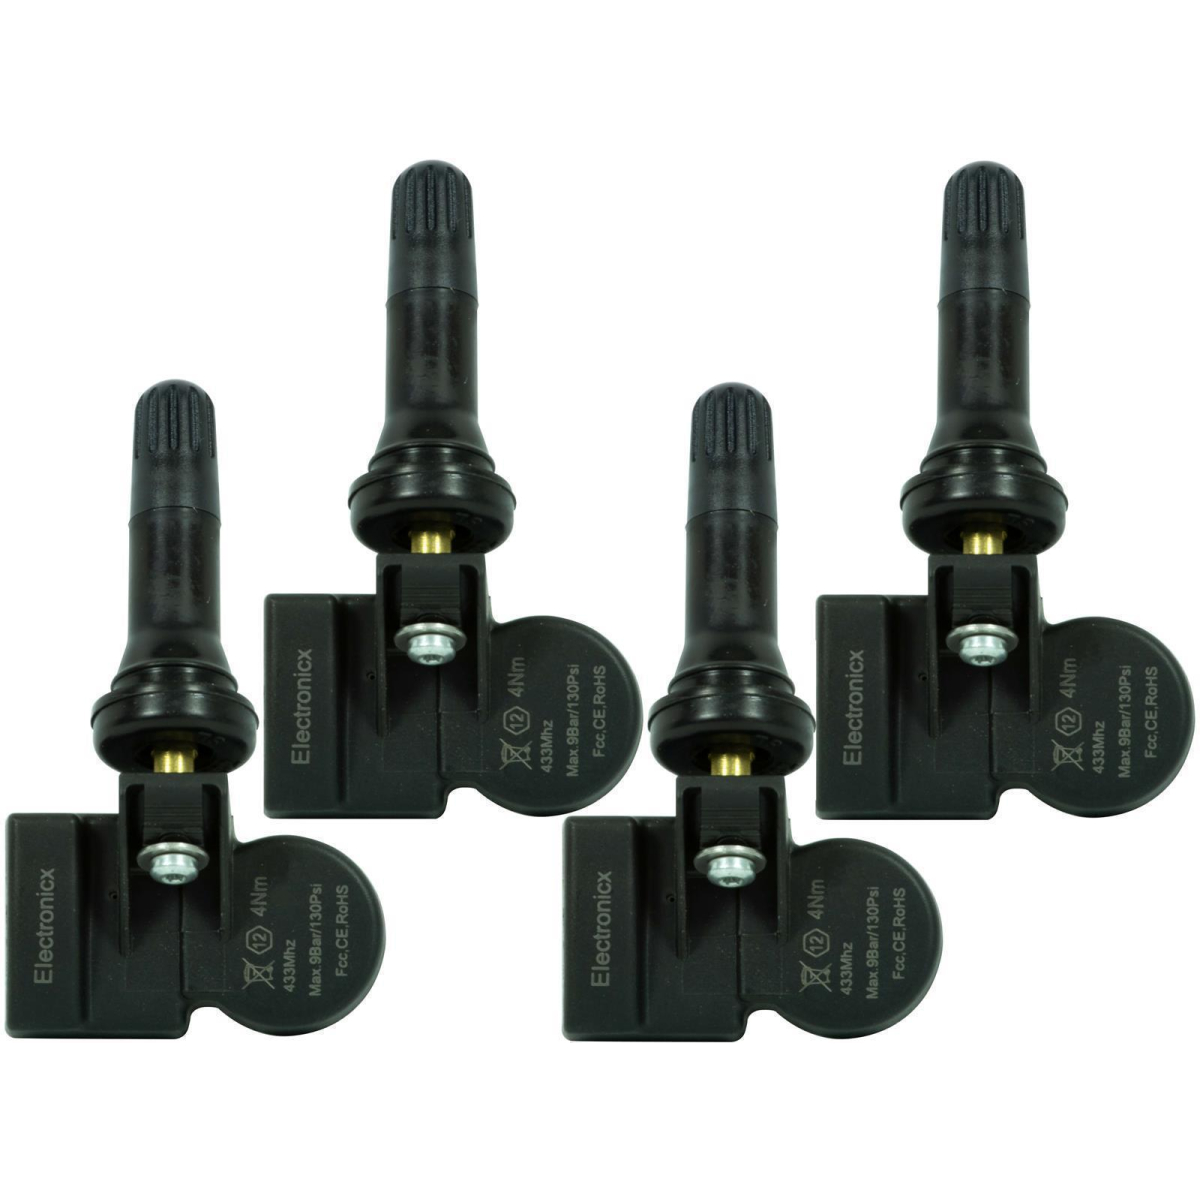 4x RDKS TPMS tire pressure sensors rubber valve for Land Rover Discovery 3